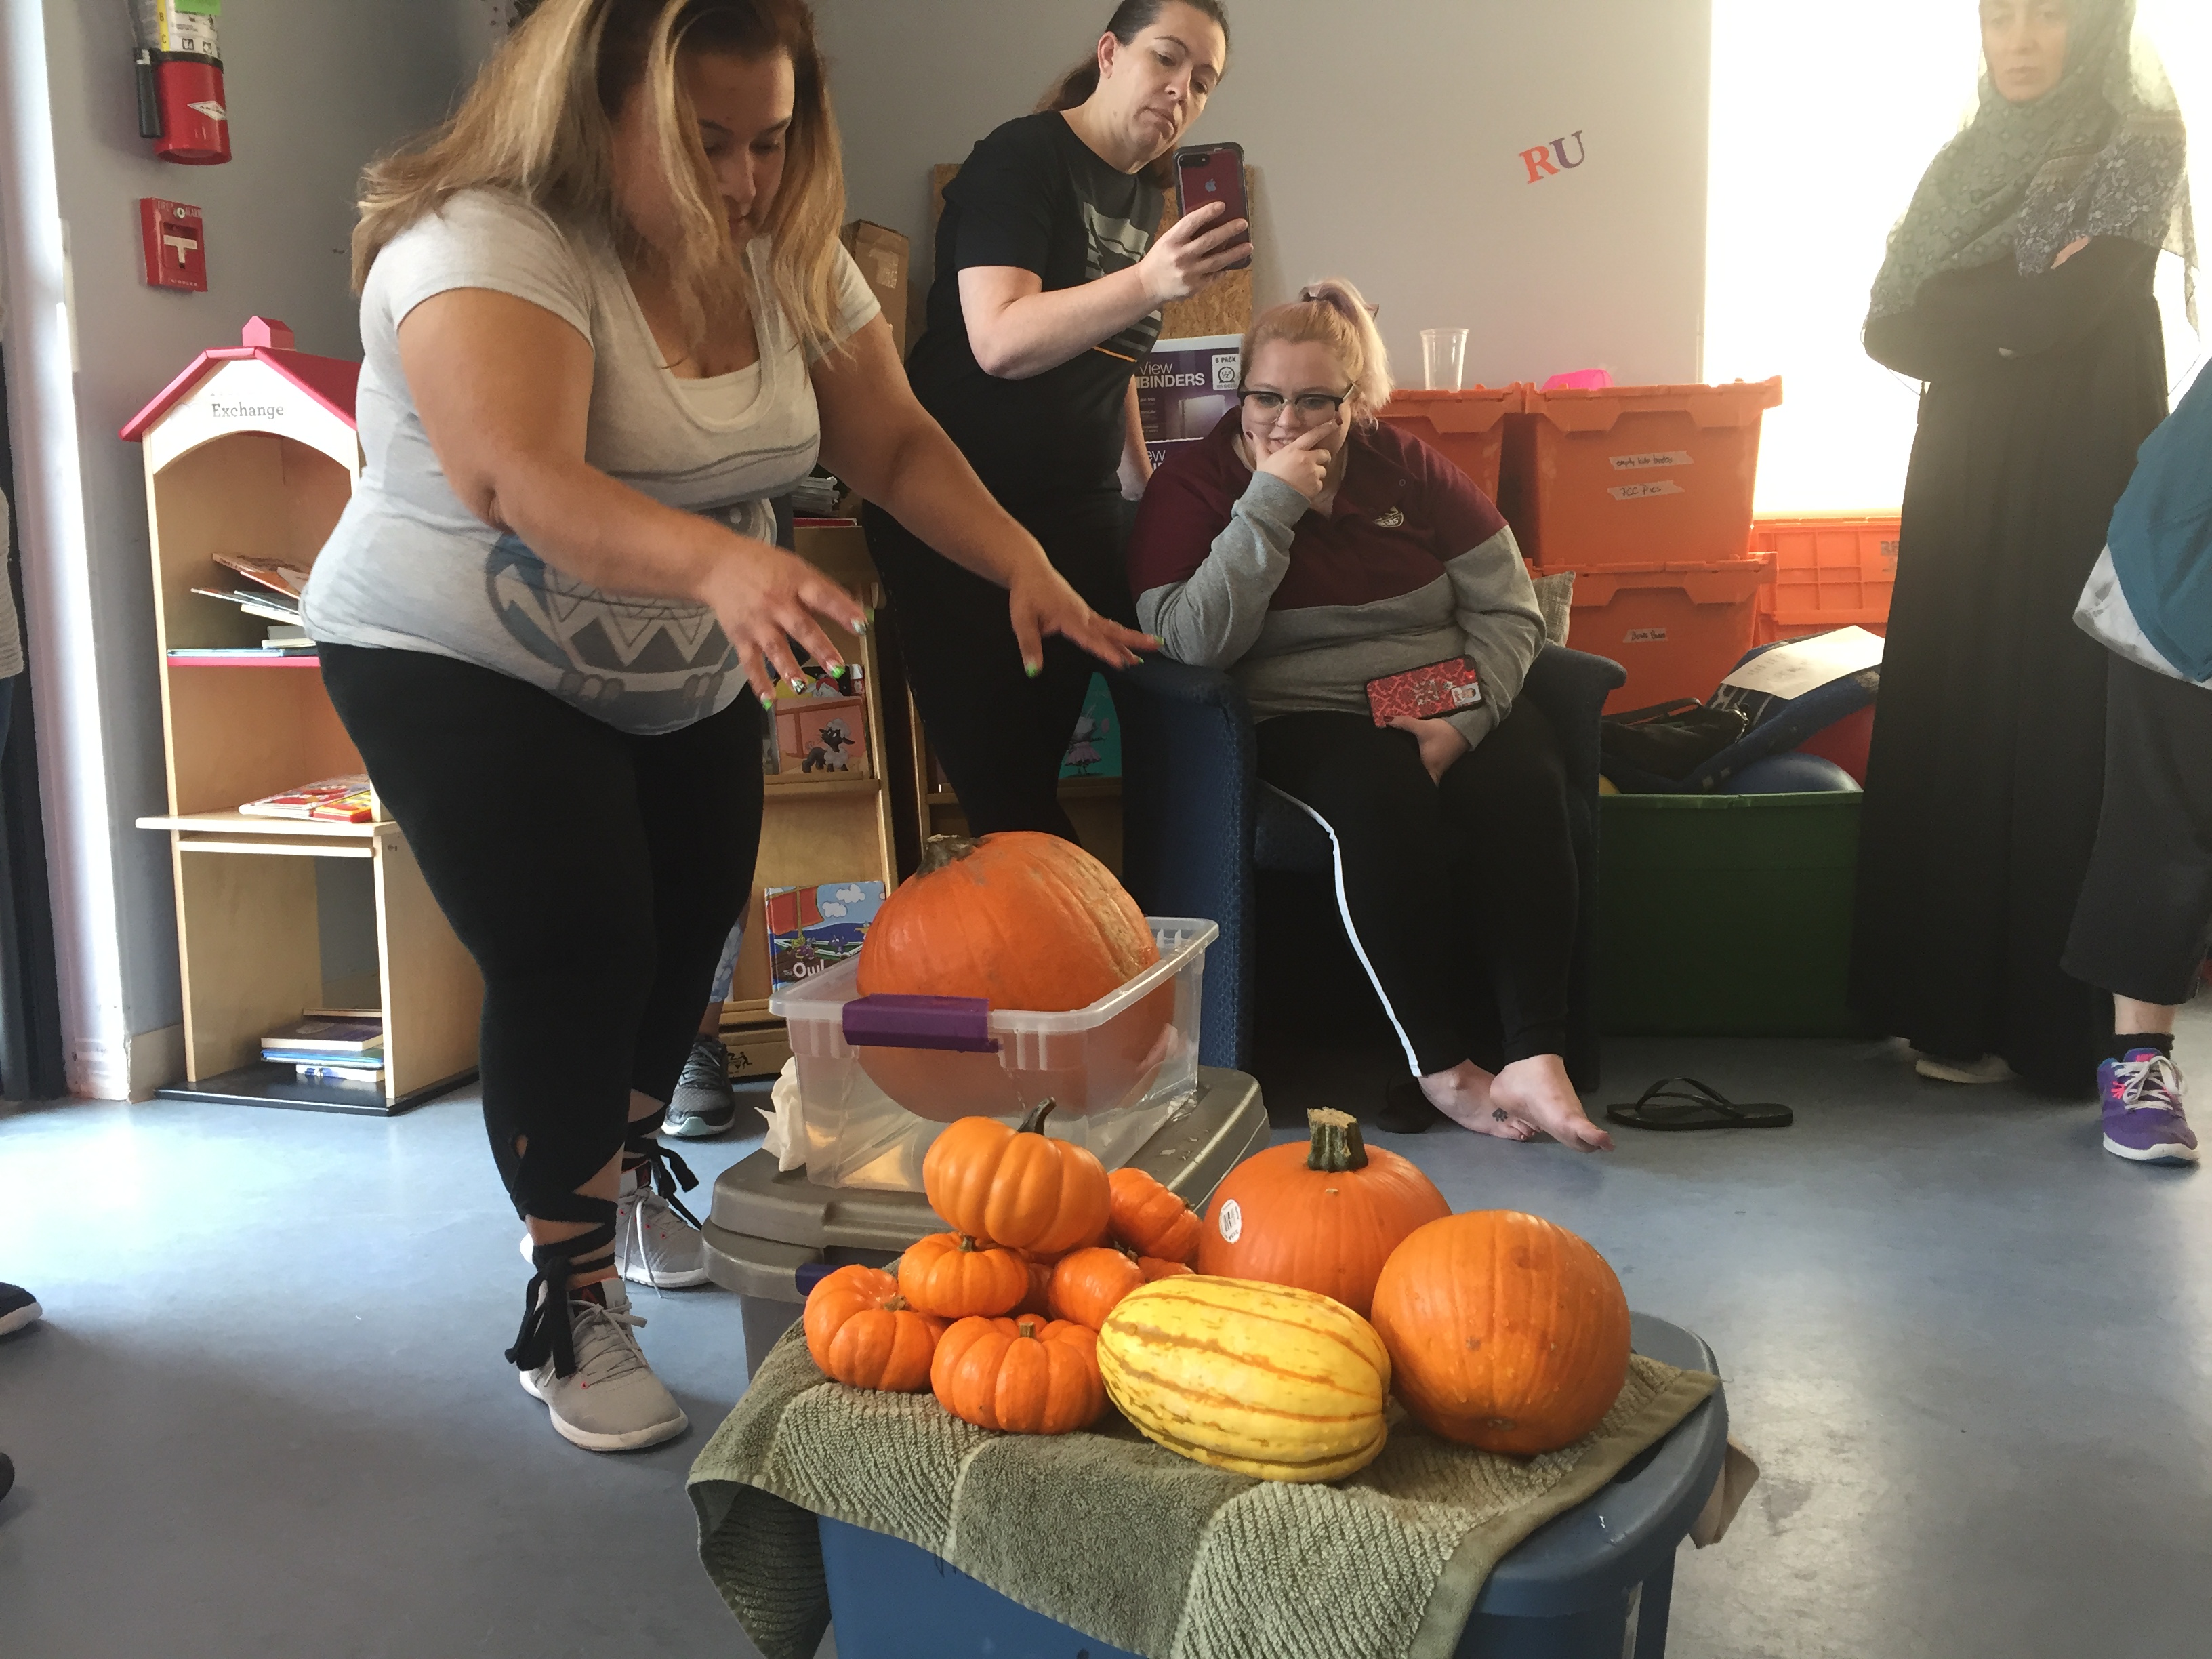 Teacher putting a large pumpkin into a tub of water. Next to it are many smaller pumpkins.